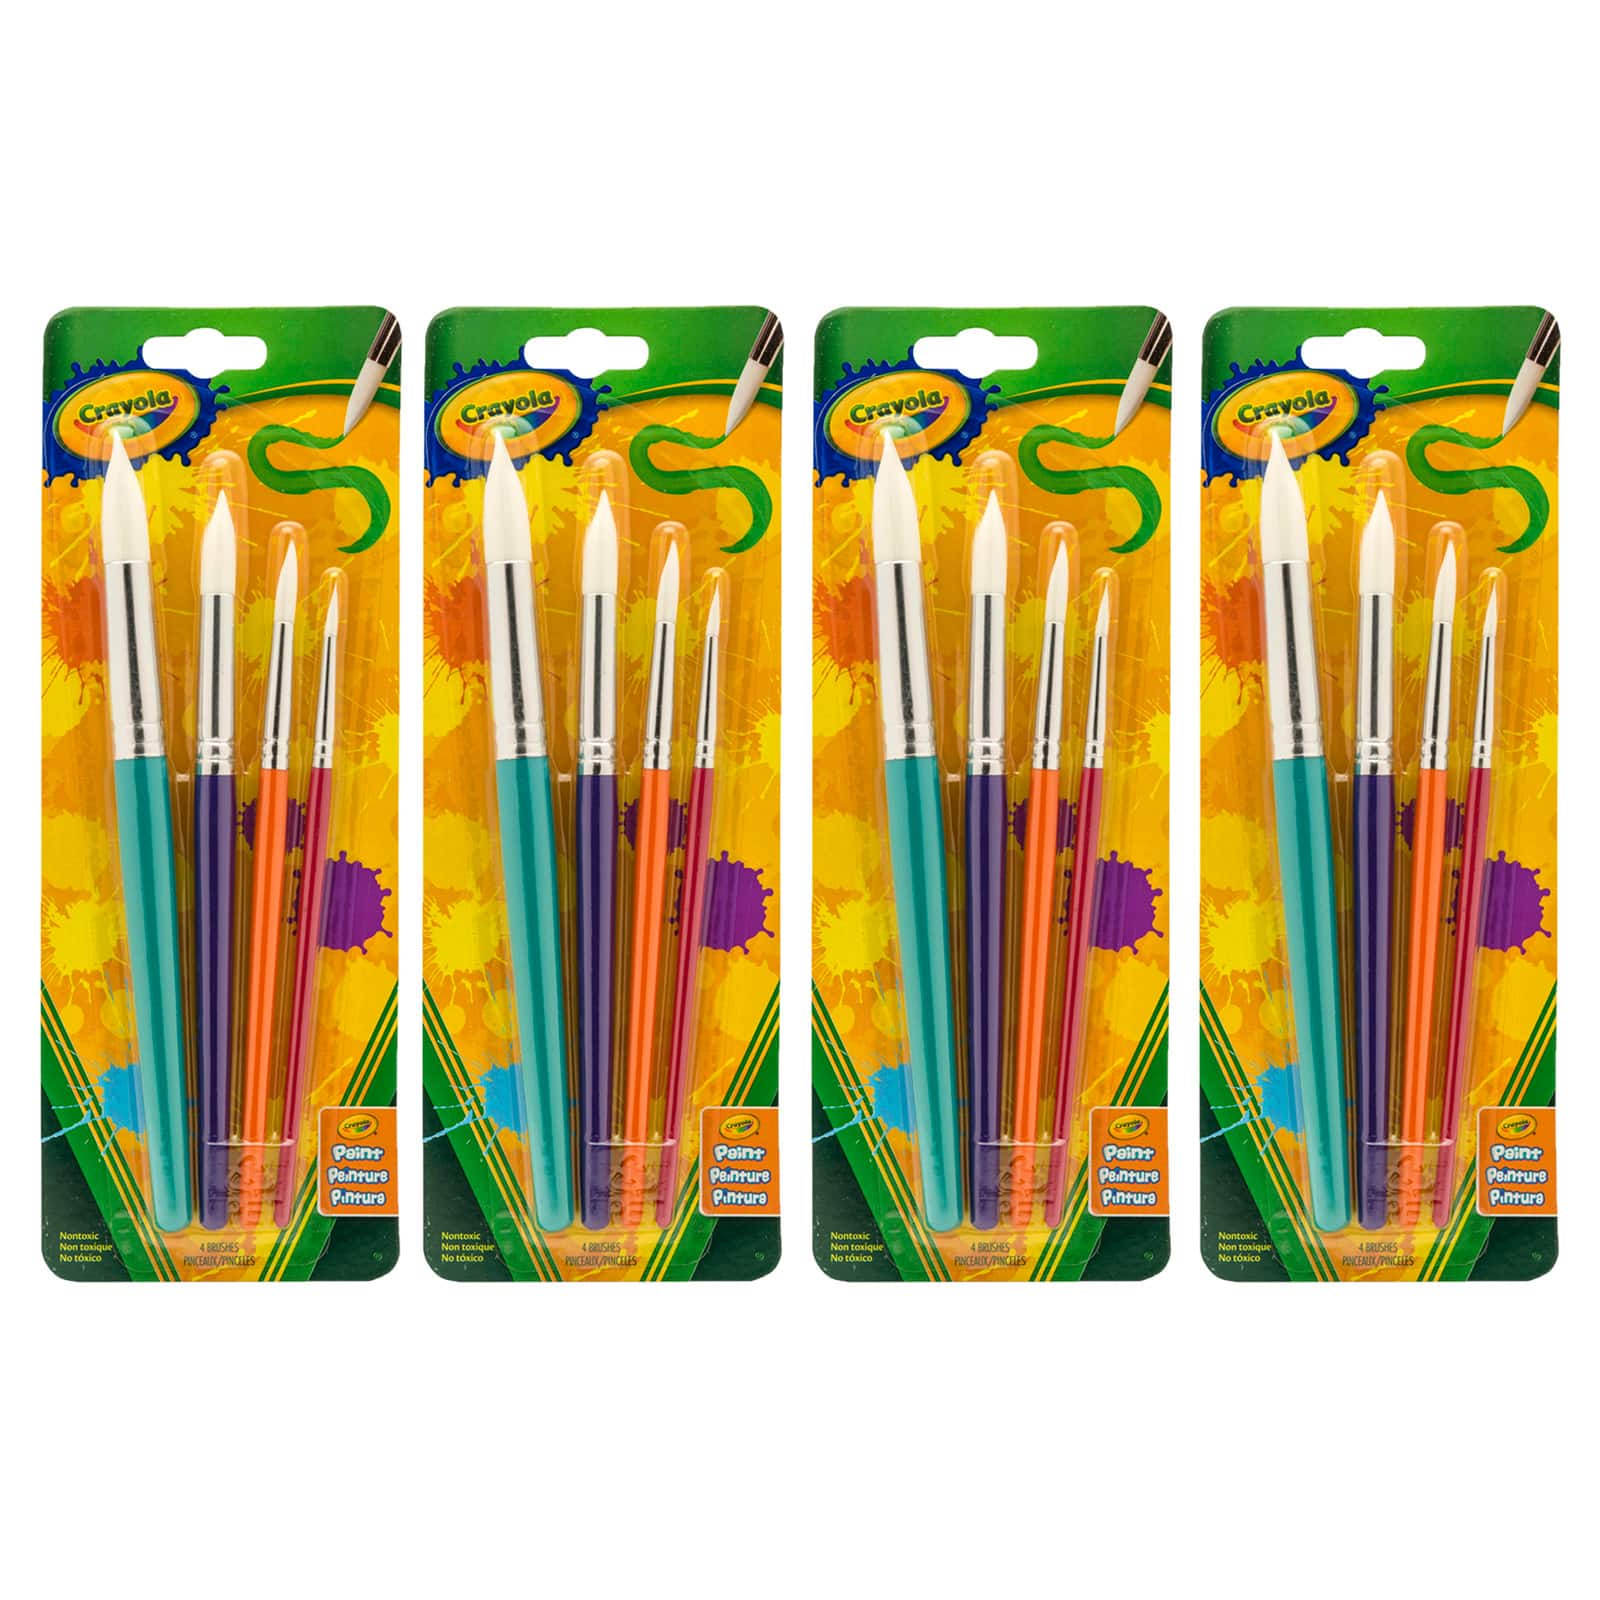 Crayola 4 Assorted Round Paint Brushes – Brighten Up Toys & Games